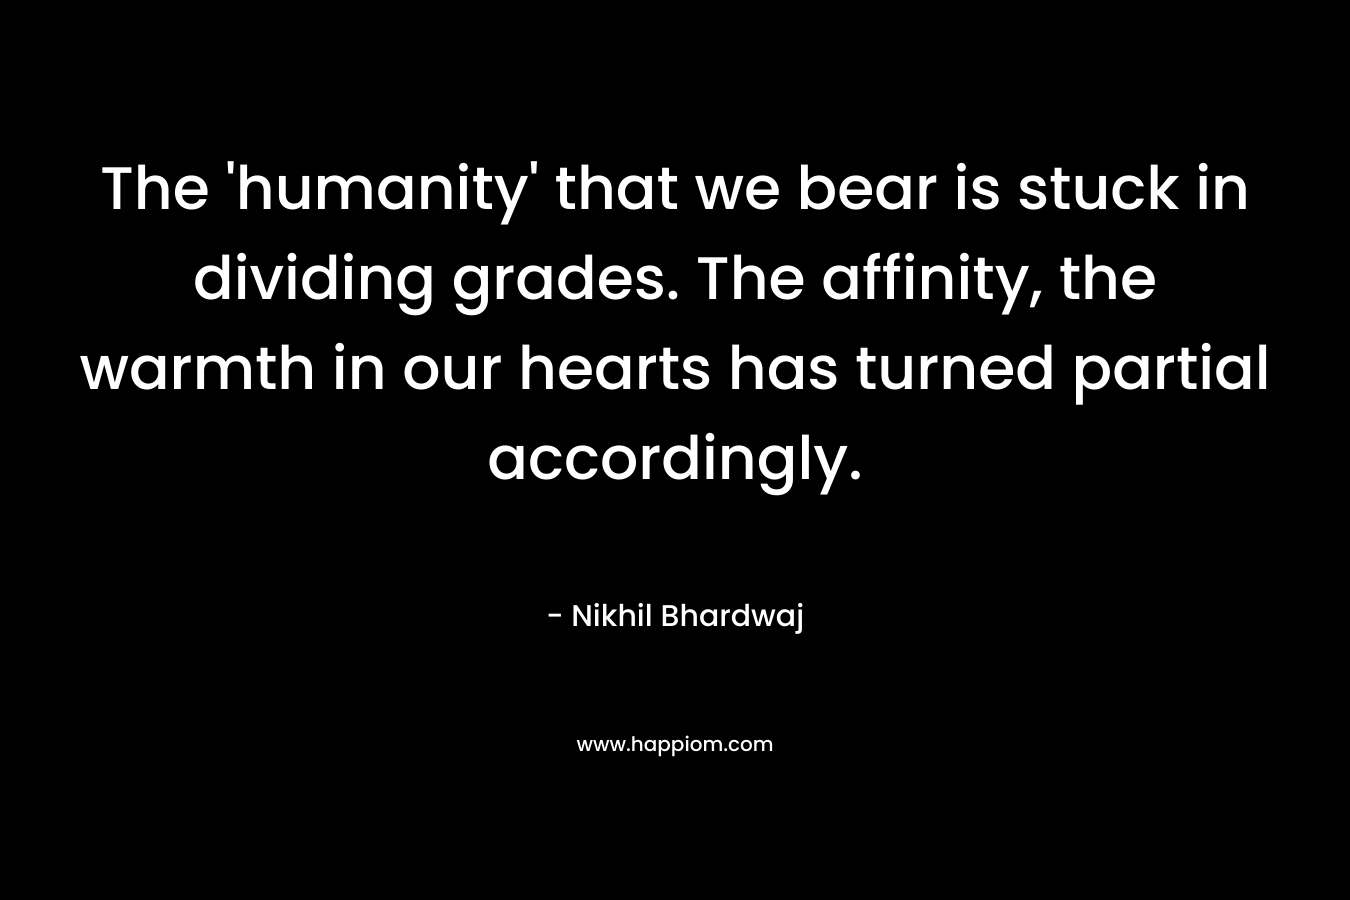 The ‘humanity’ that we bear is stuck in dividing grades. The affinity, the warmth in our hearts has turned partial accordingly. – Nikhil Bhardwaj